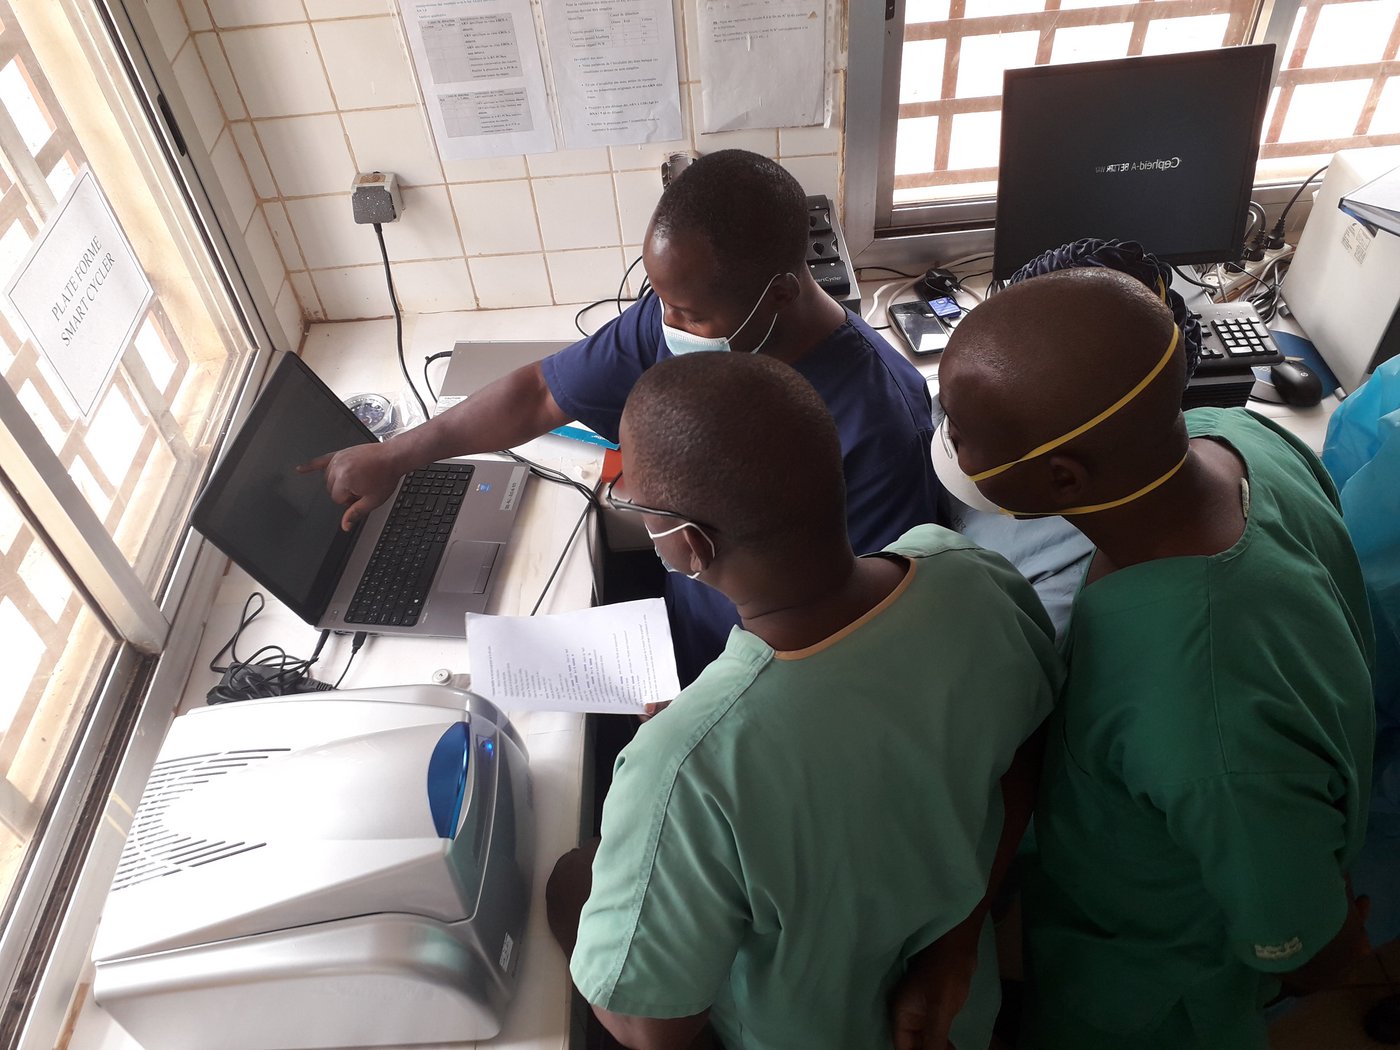 The picture shows three African researchers in a laboratory situation in front of a computer.